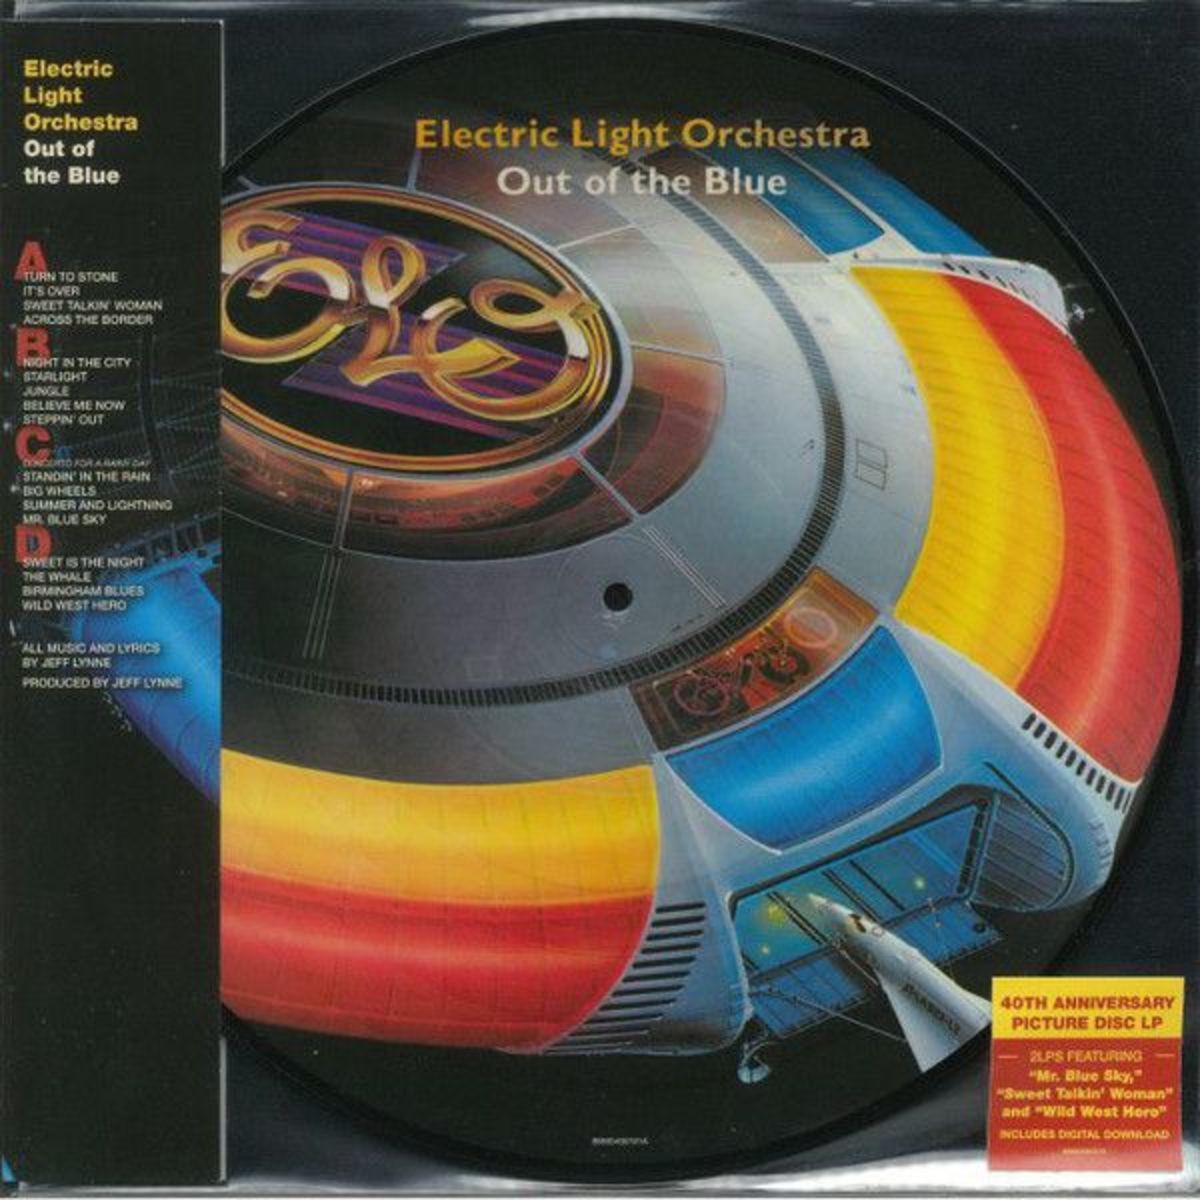 Blue skies electric light orchestra. Electric Light Orchestra - out of the Blue Vinyl 2lp конверт. Electric Light Orchestra time (винил). Electric Light Orchestra пластинки. Electric Light Orchestra out of the Blue 1977.